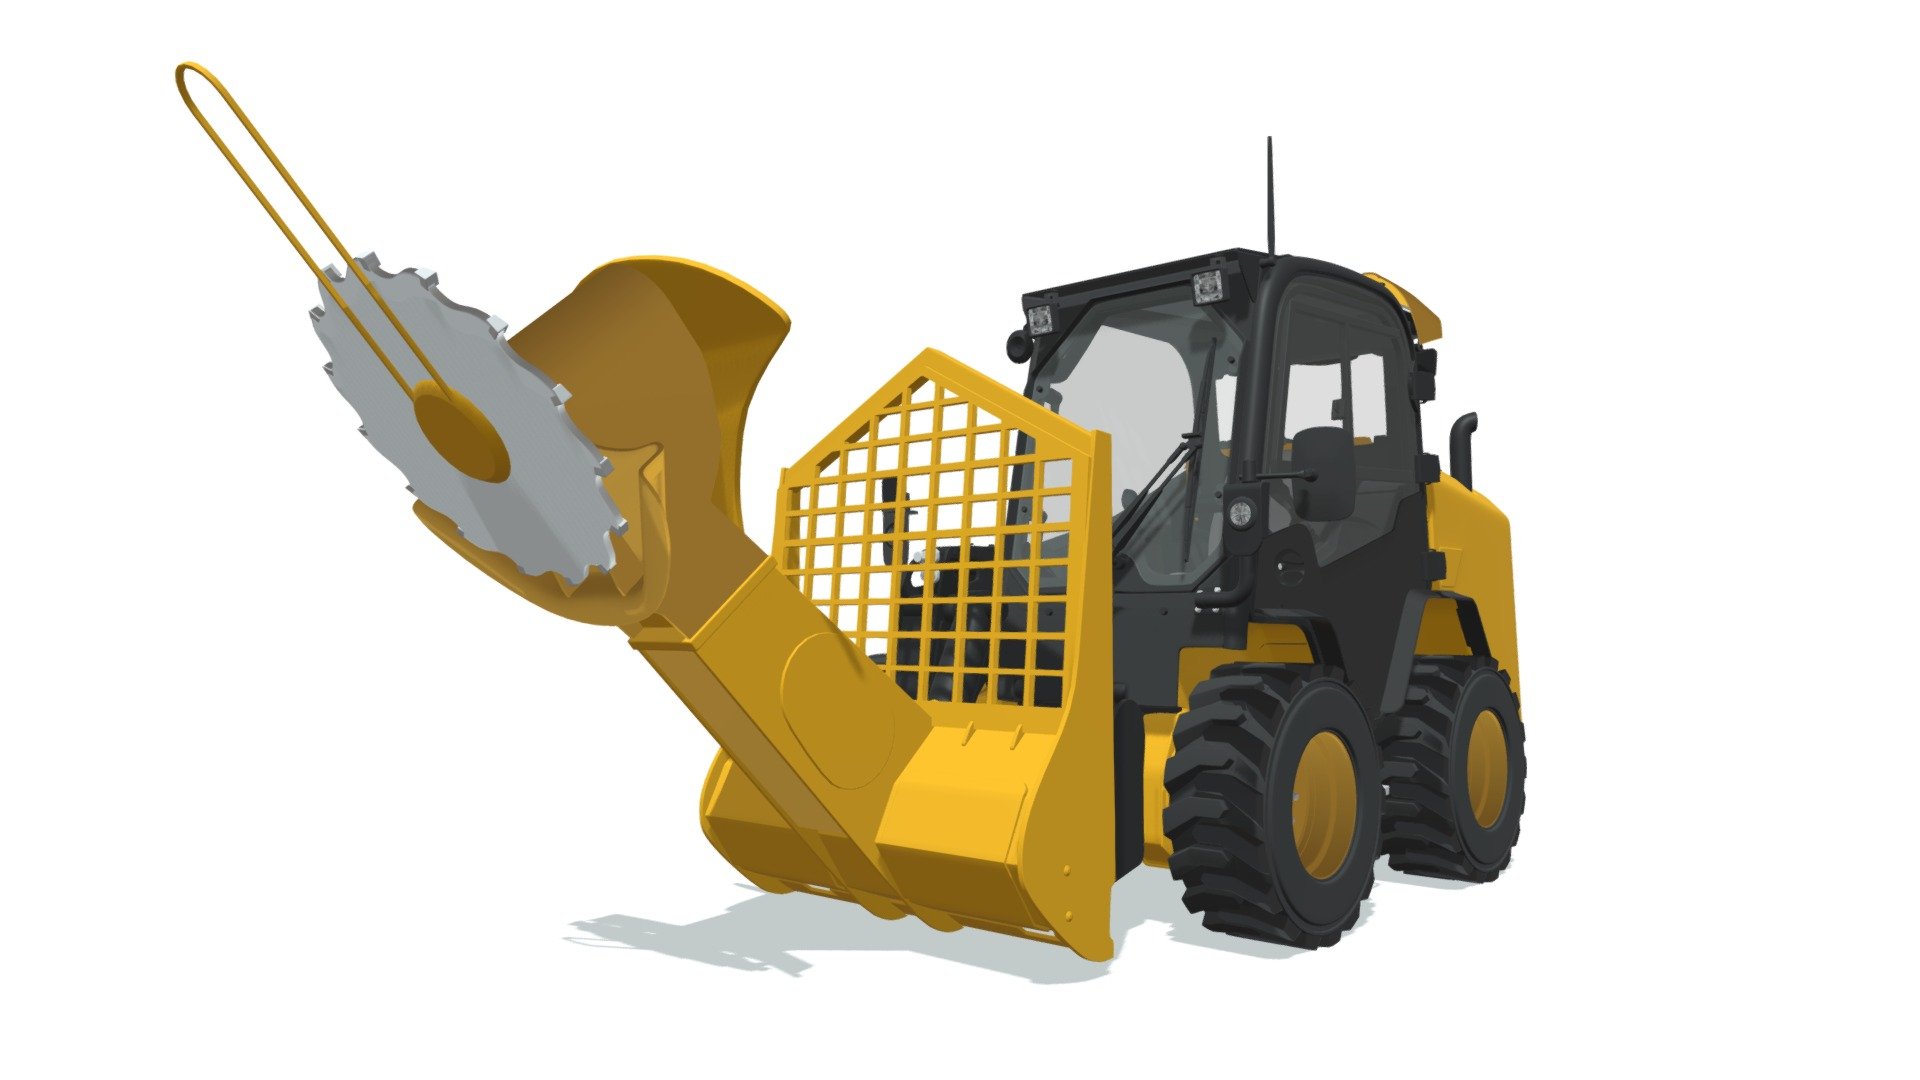 High quality 3d model of skid steer loader with tree cutter bucket.
Model comes with semi interior details 3d model